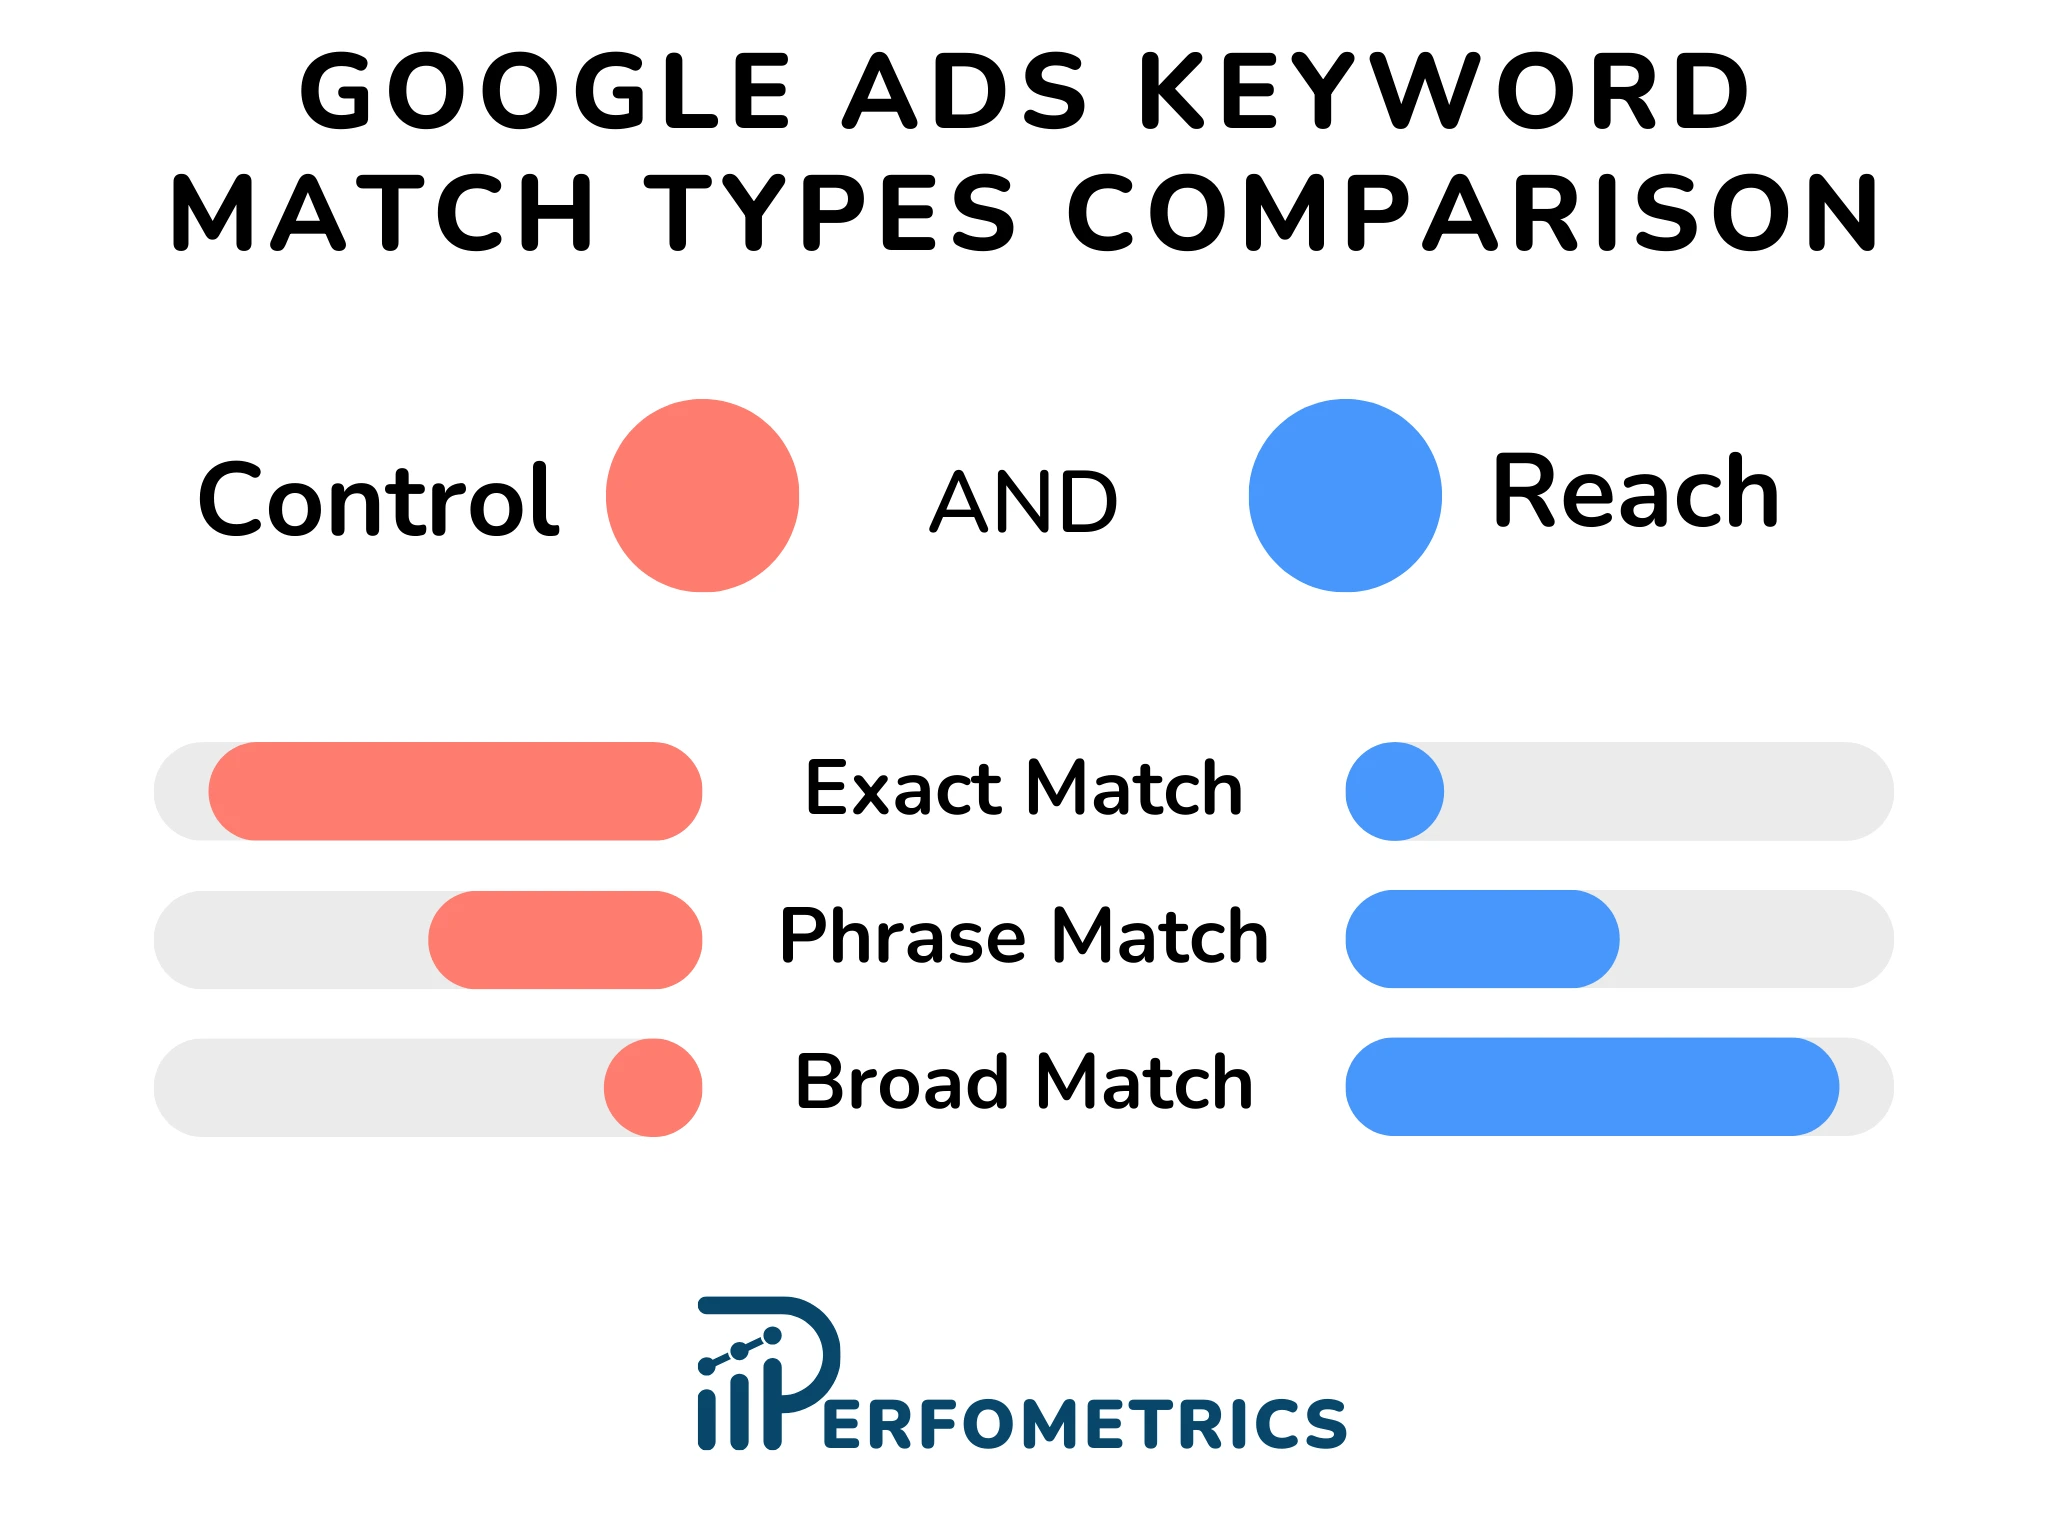 Comparison of Reach and Control Between Google Ads Keyword Match Types